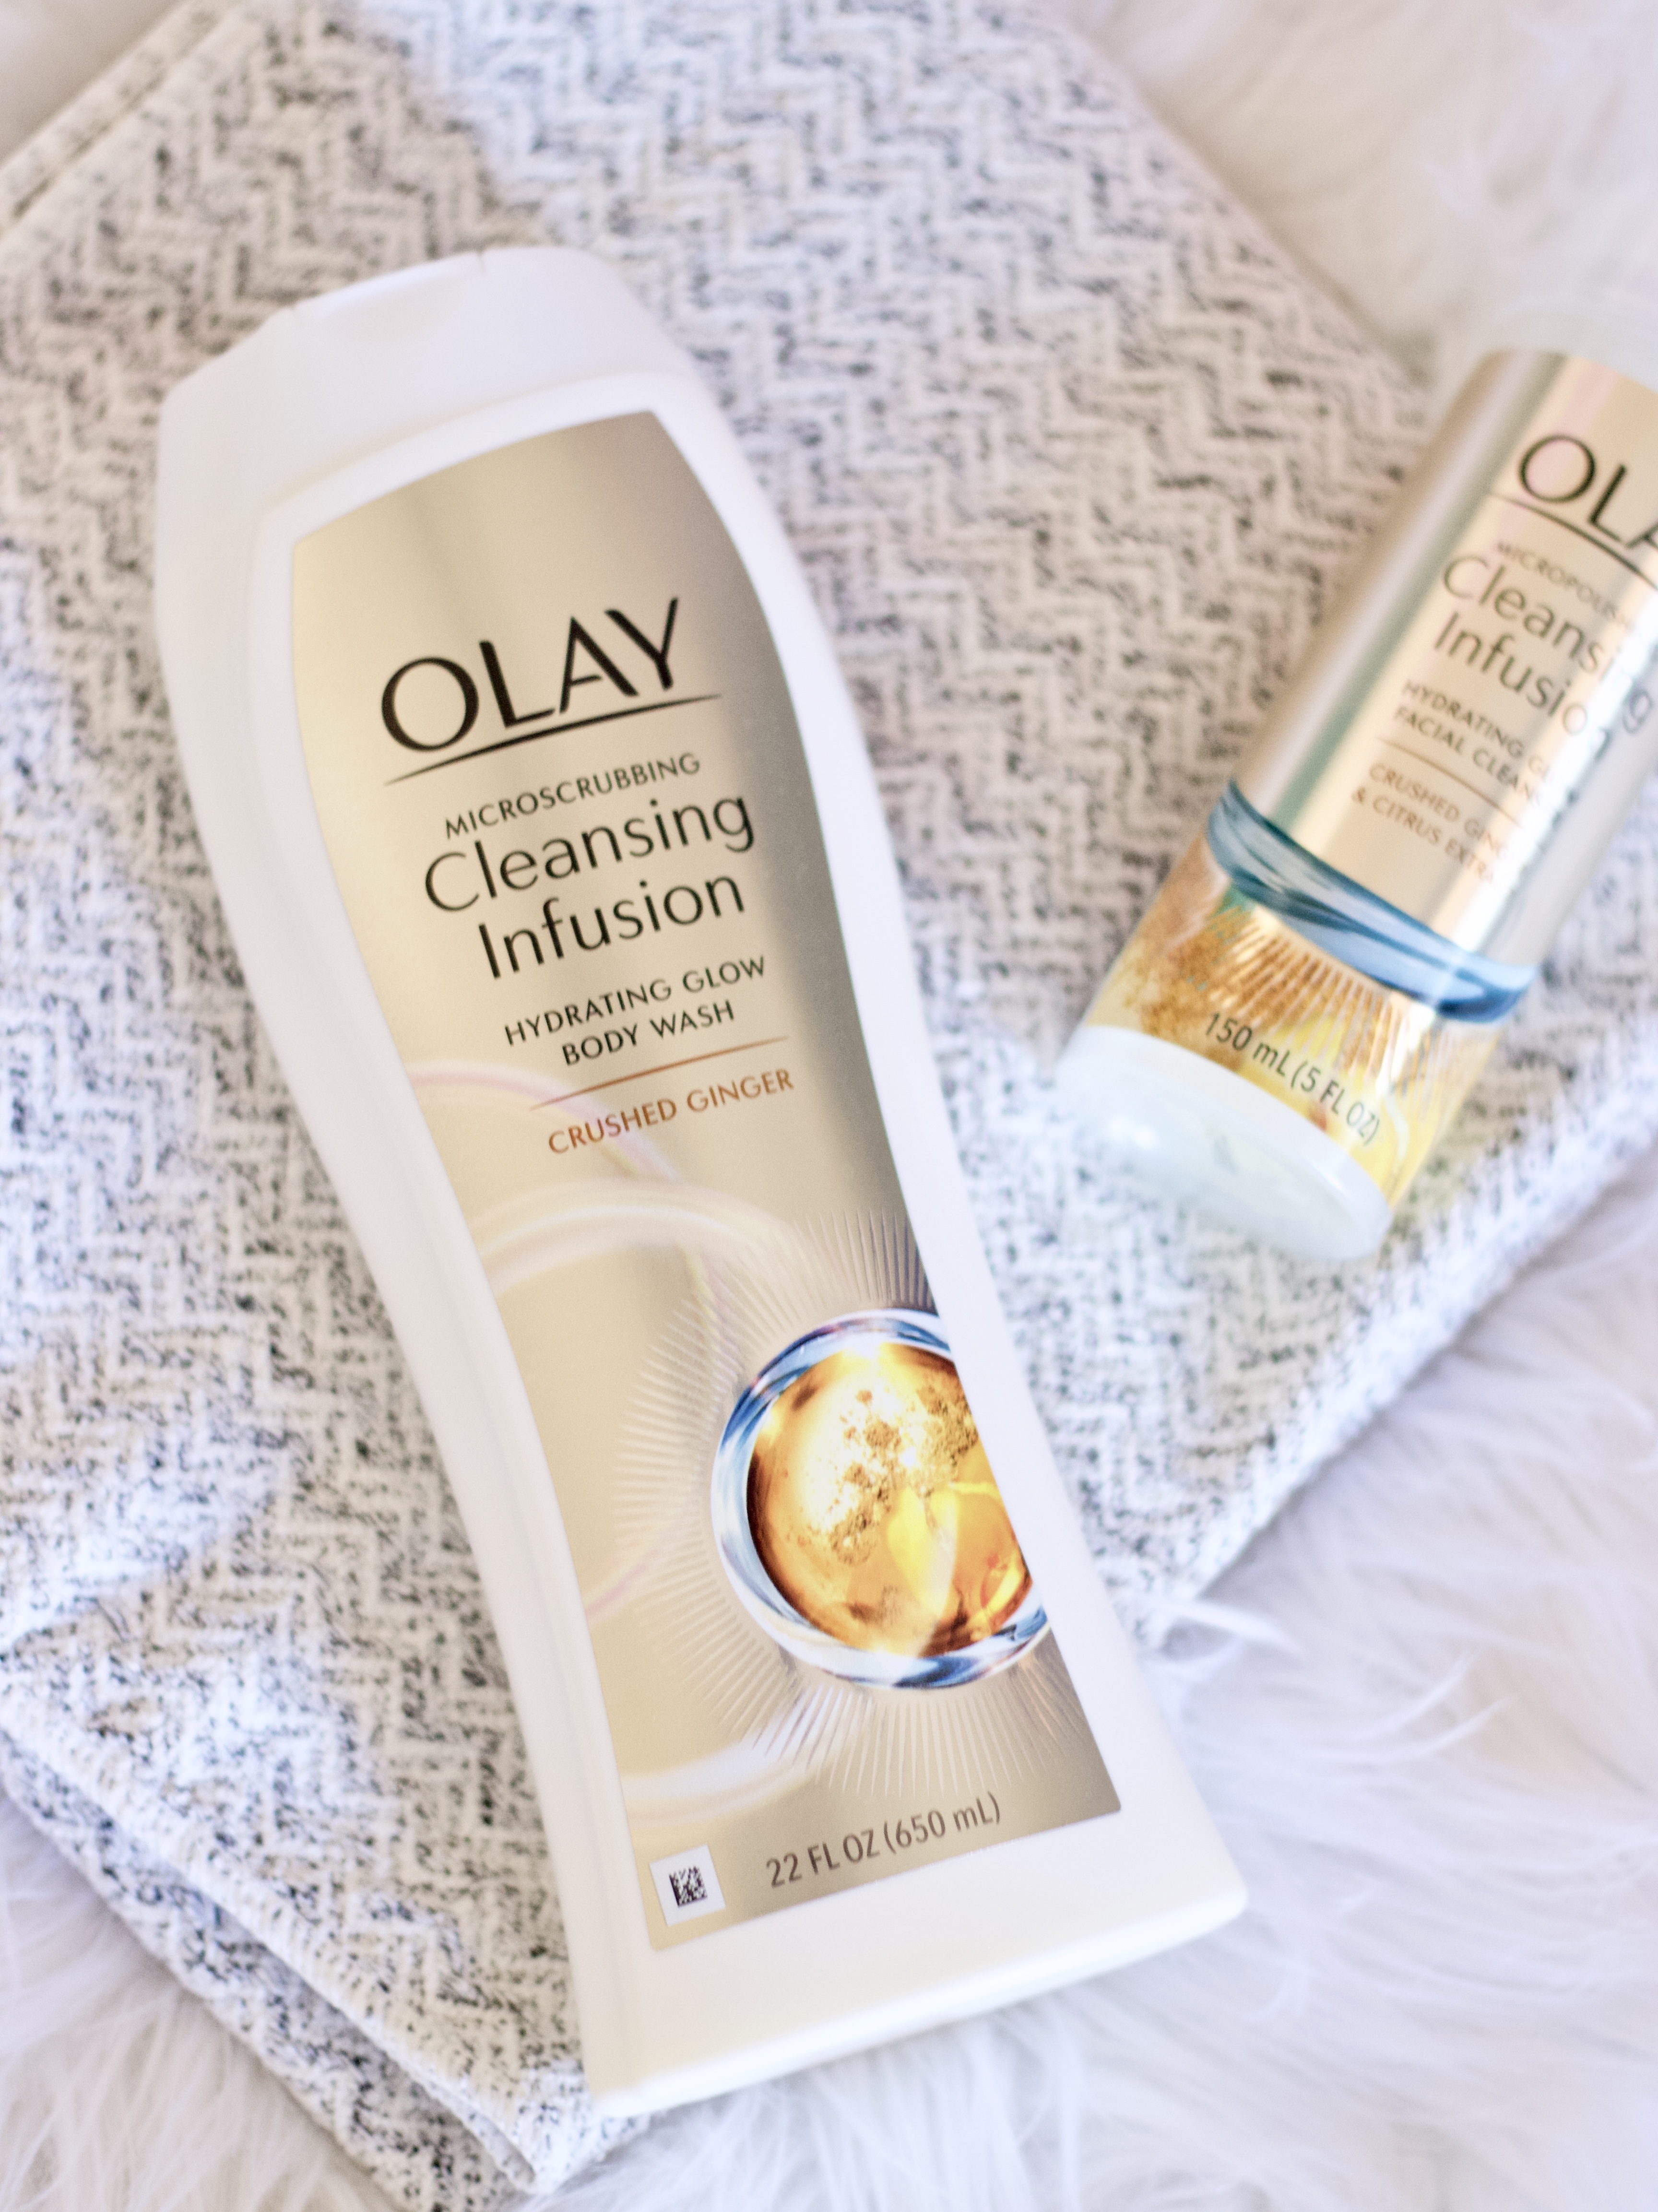 glowing skin for spring #glowup #olay #affordableskincare